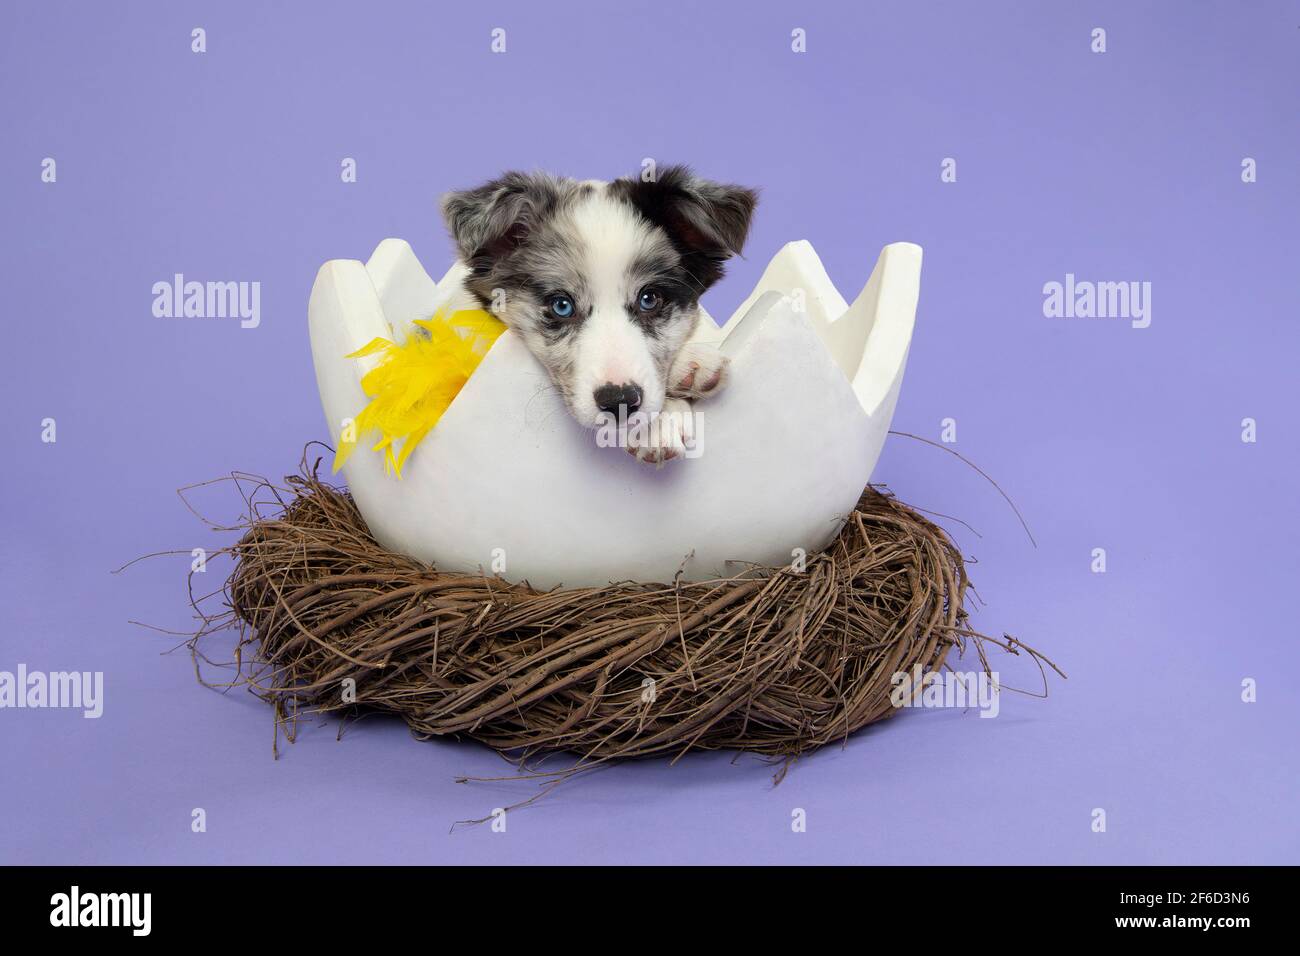 Cute border collie puppy in a easter egg shell in a animals nest with yellow feathers on a purple lavender background with space for copy Stock Photo